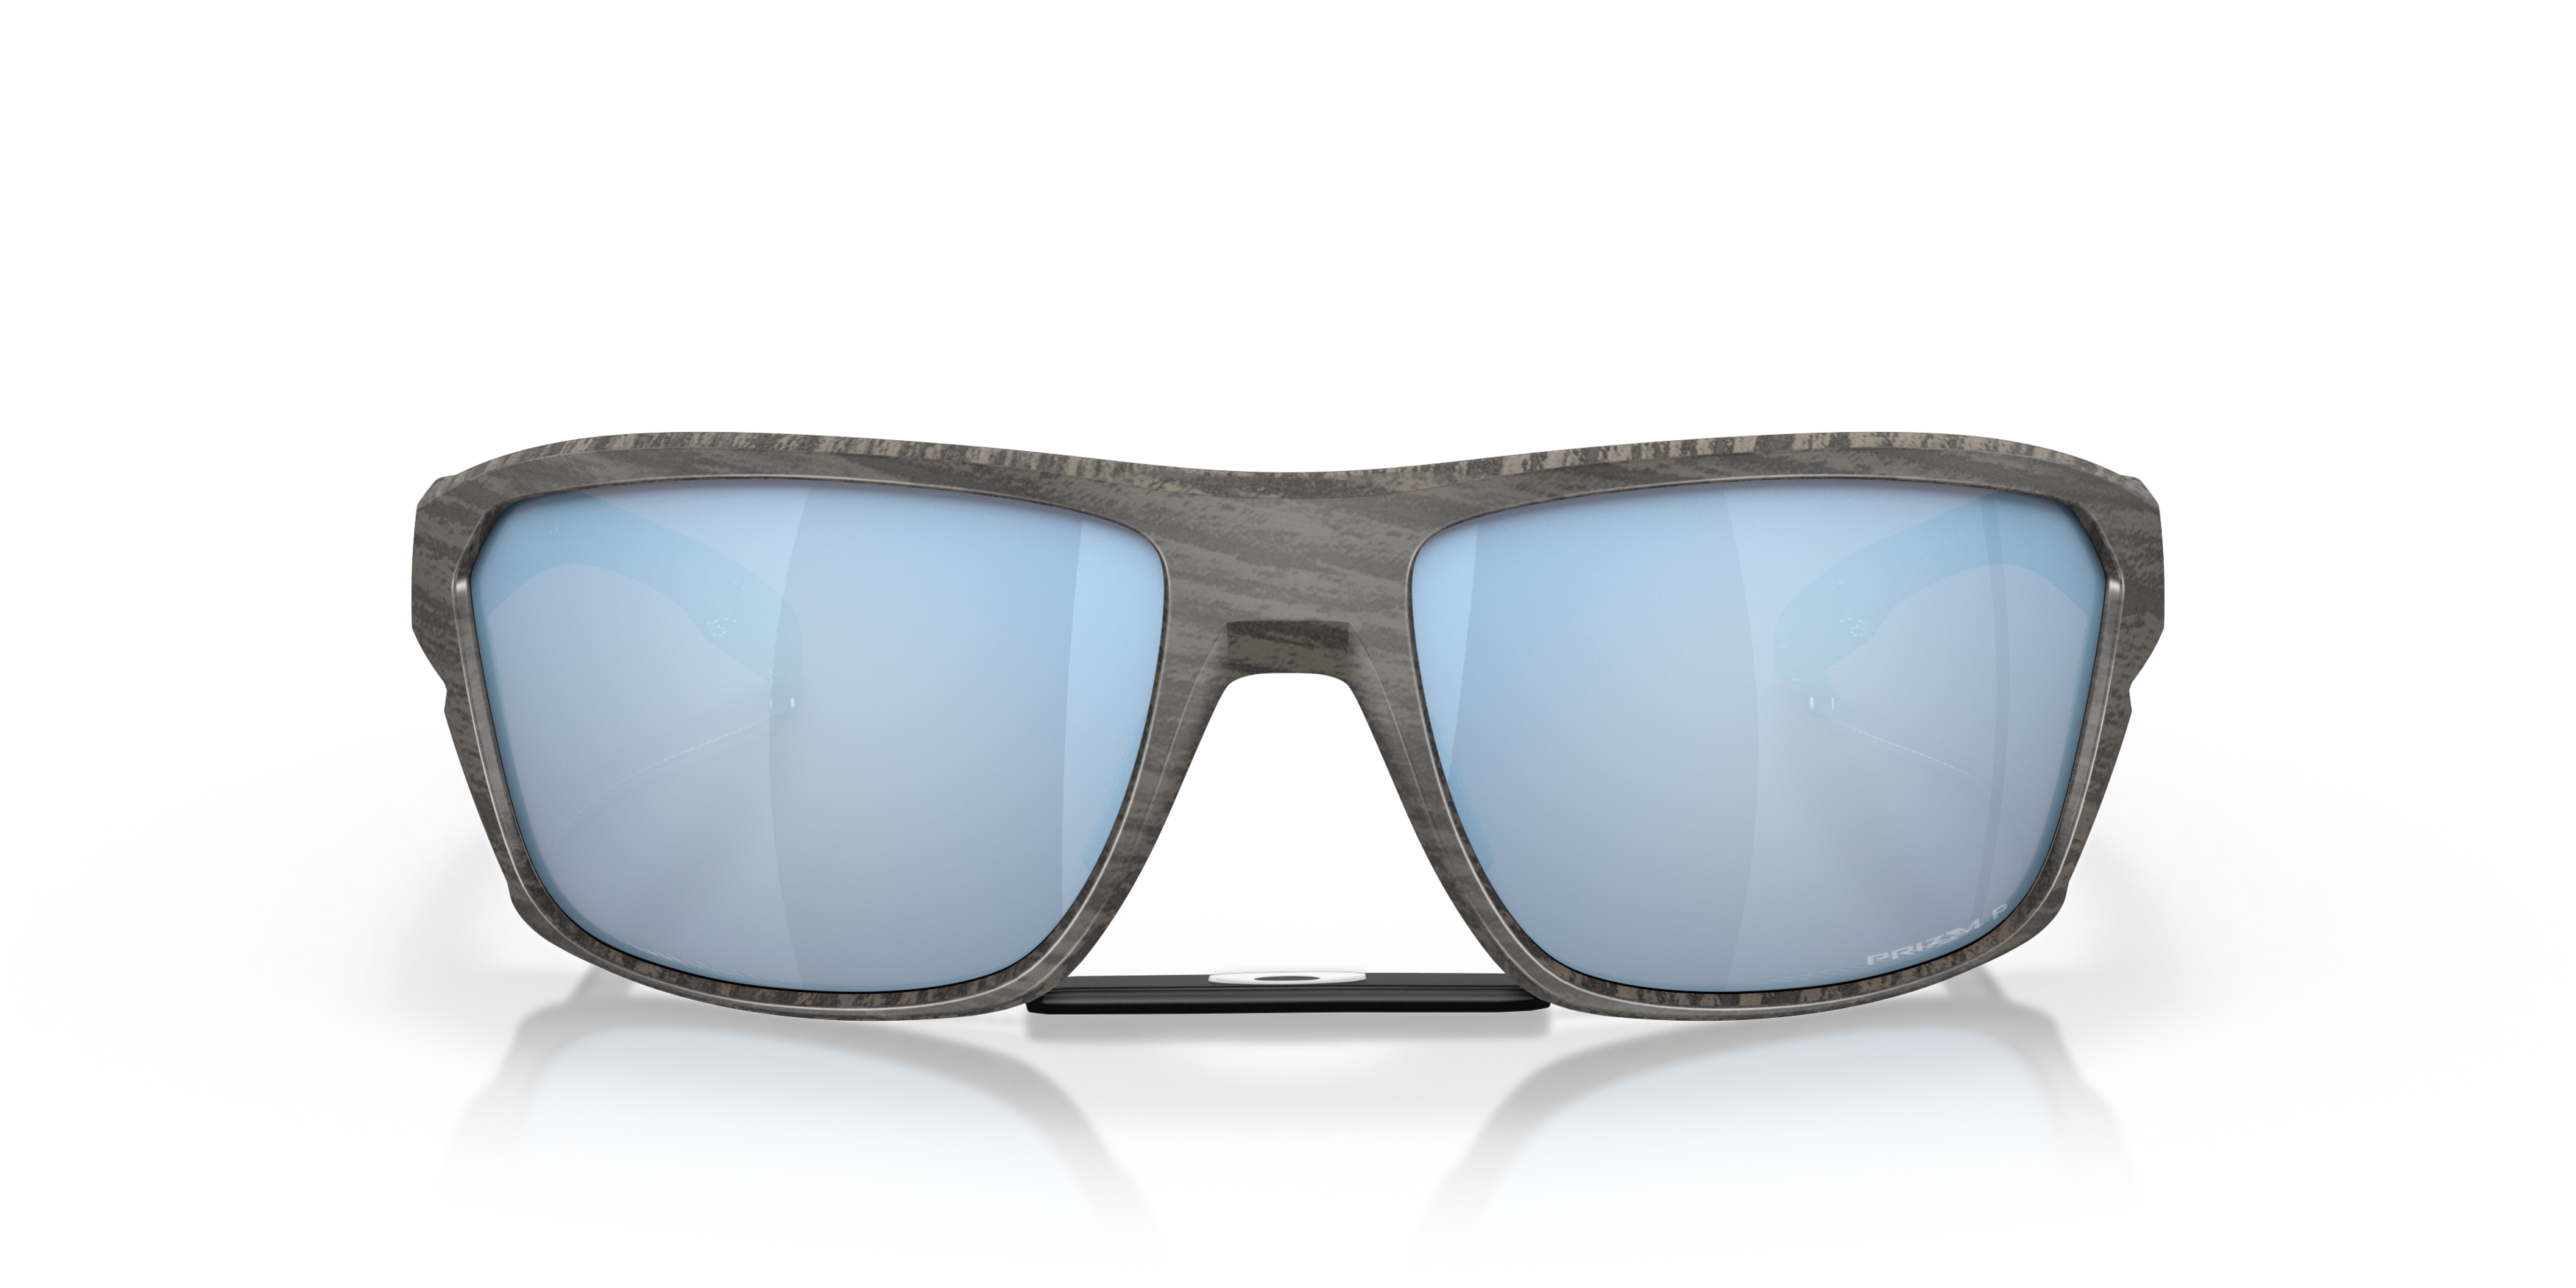 [products.image.front] Oakley 0OO9416 941616